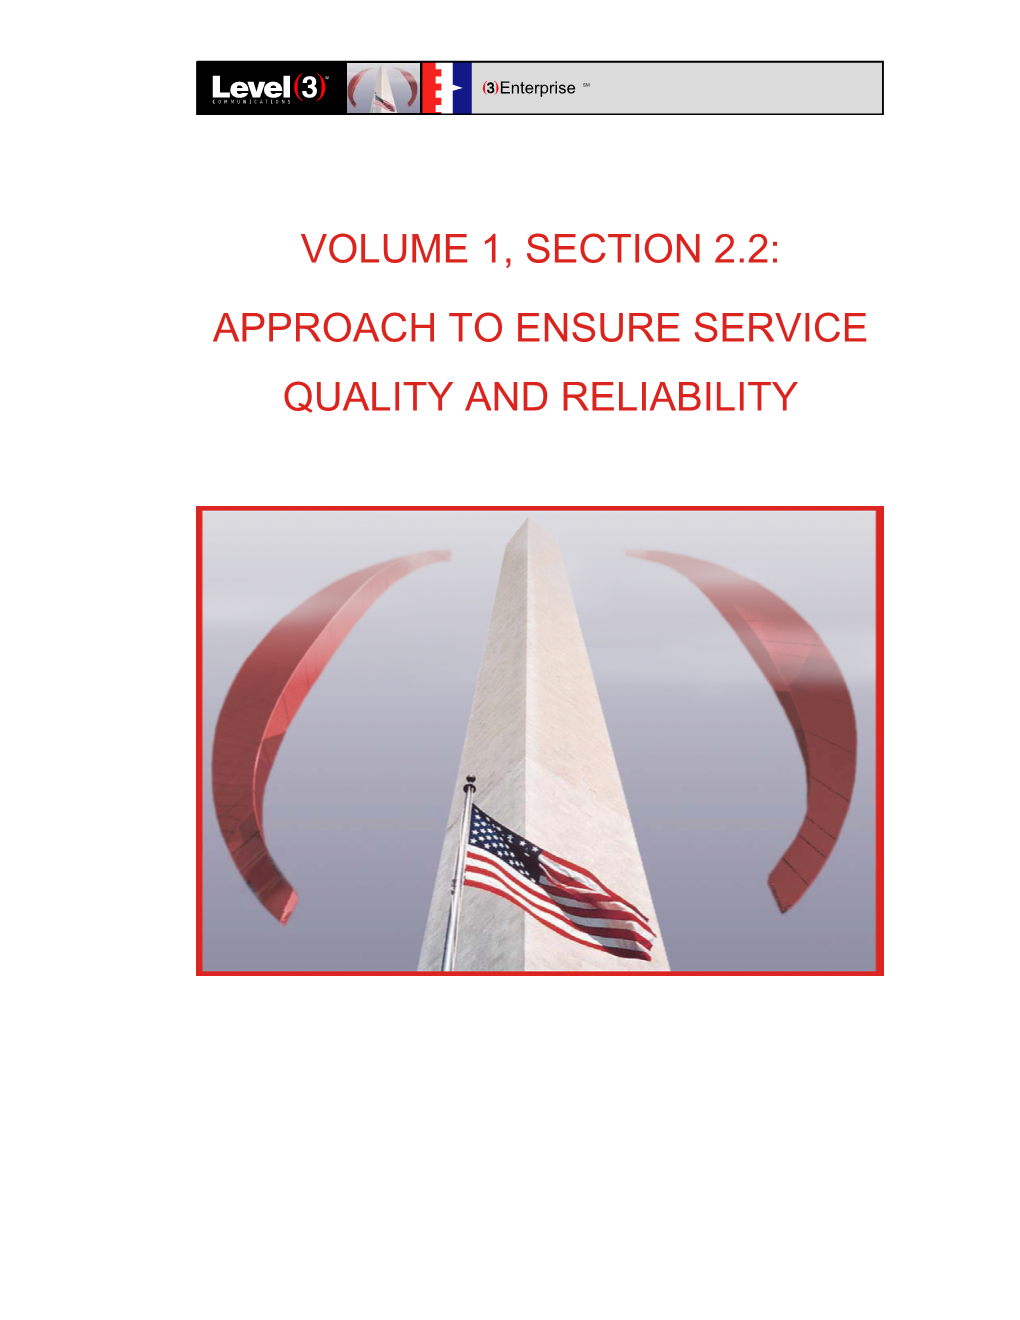 Volume 1, Section 2.2: Approach to Ensure Service Quality and Reliability